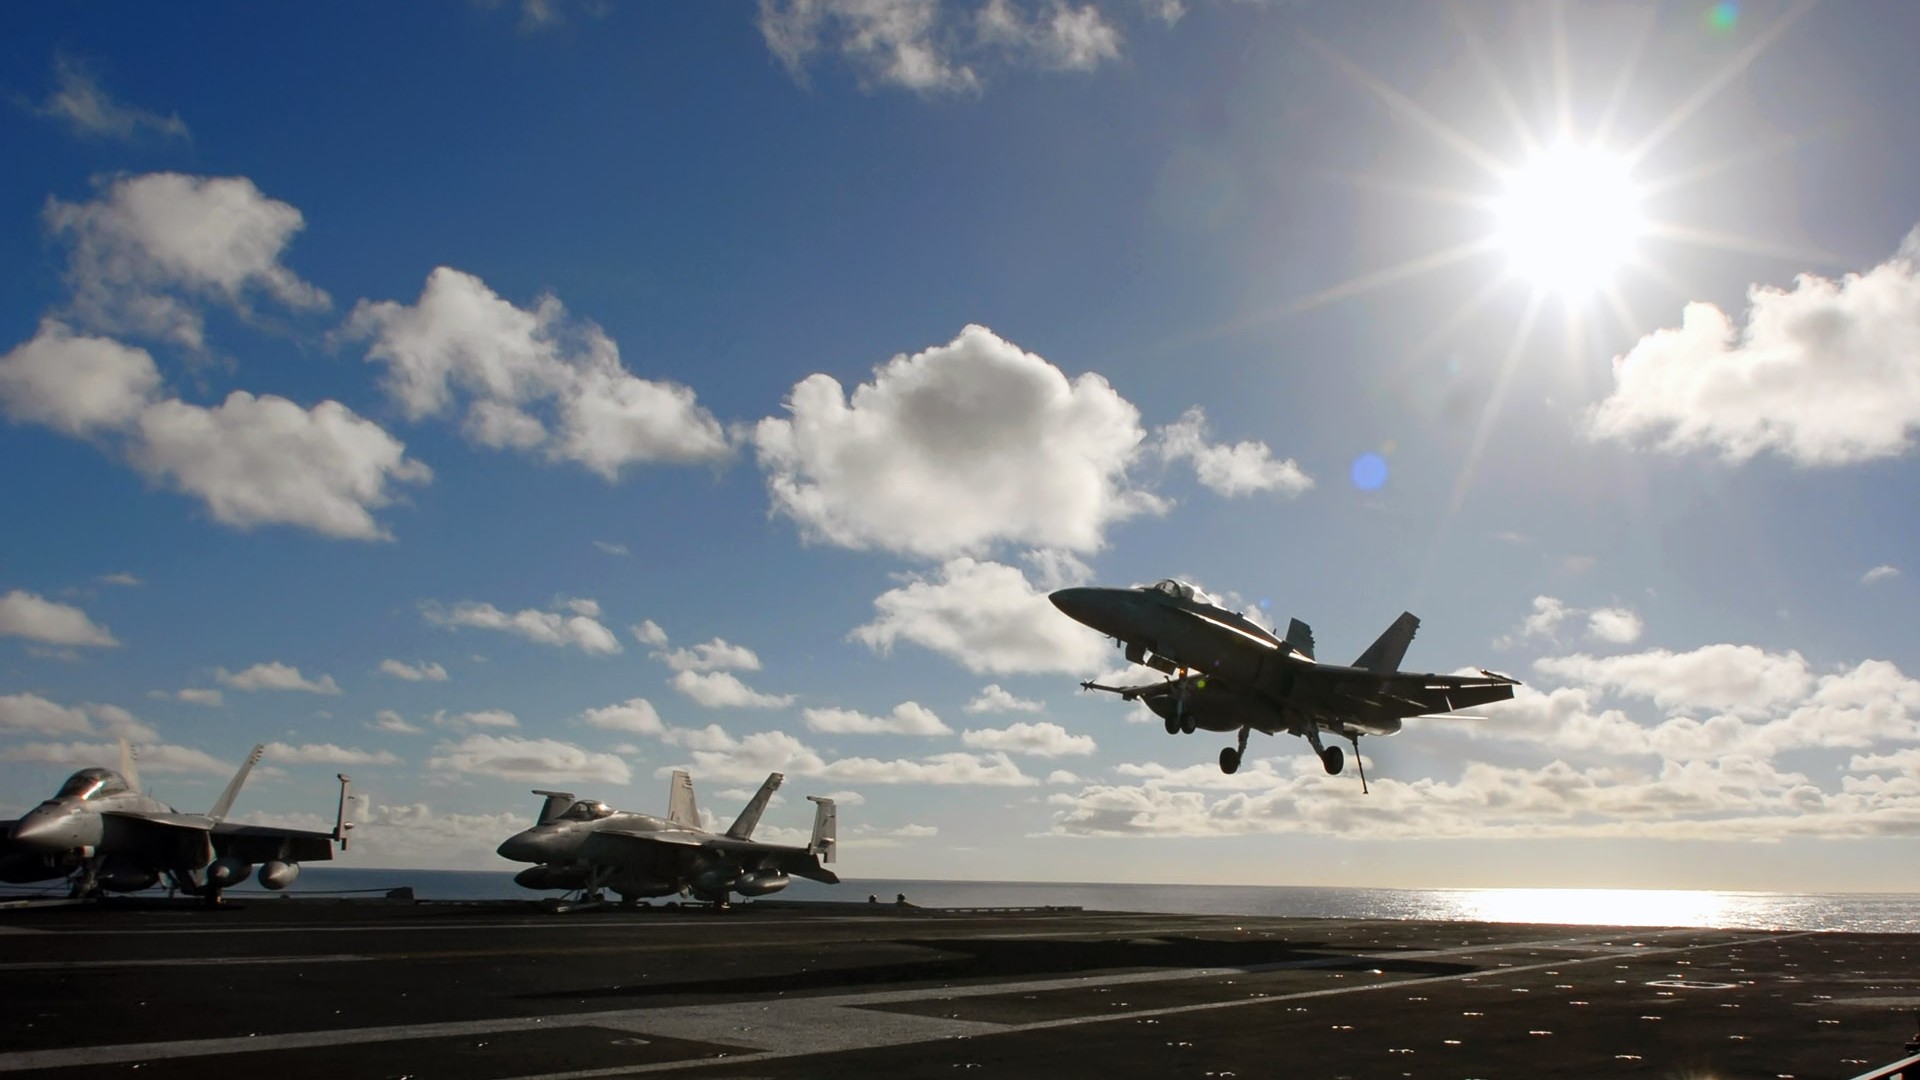 General 1920x1080 military aircraft airplane jets sky military clouds aircraft aircraft carrier McDonnell Douglas F/A-18 Hornet military vehicle vehicle landing United States Navy flight deck